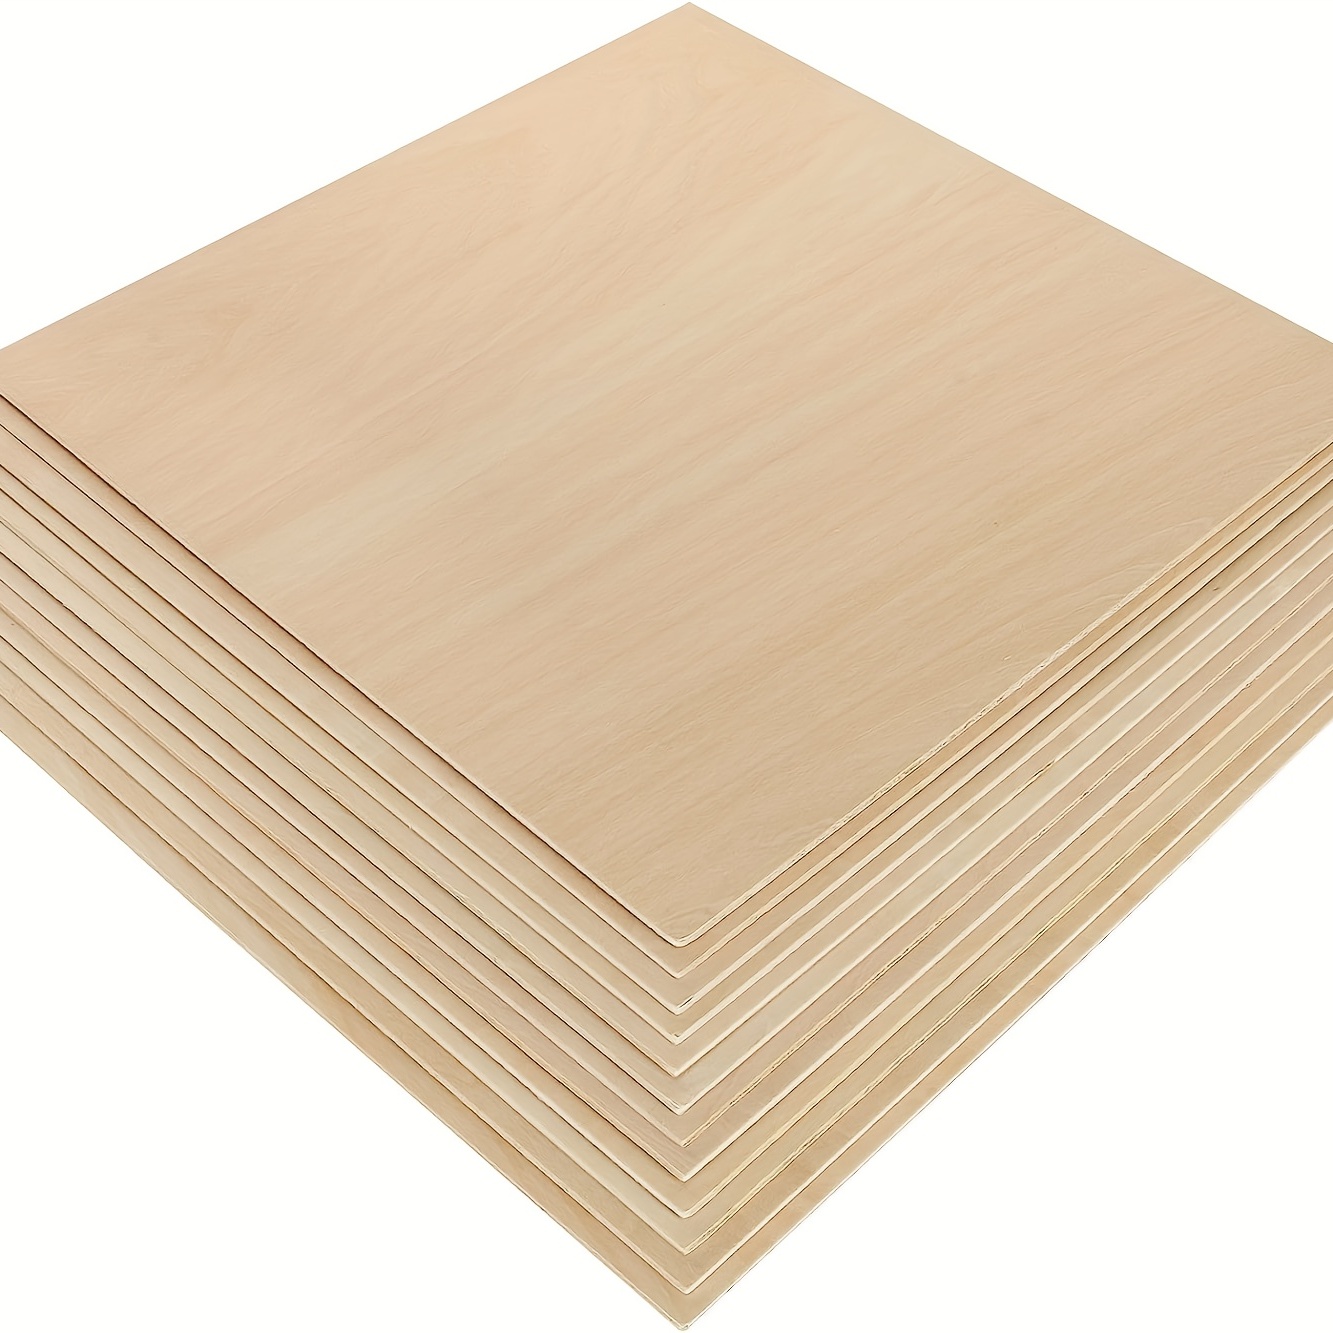 12 Packs 11.8 × 11.8 Inch Basswood Sheets Thin Wood Sheets Plywood Board  Basswood Sheets 1/8 Inch Square Wood Boards For Crafts, DIY Project, Mini Ho